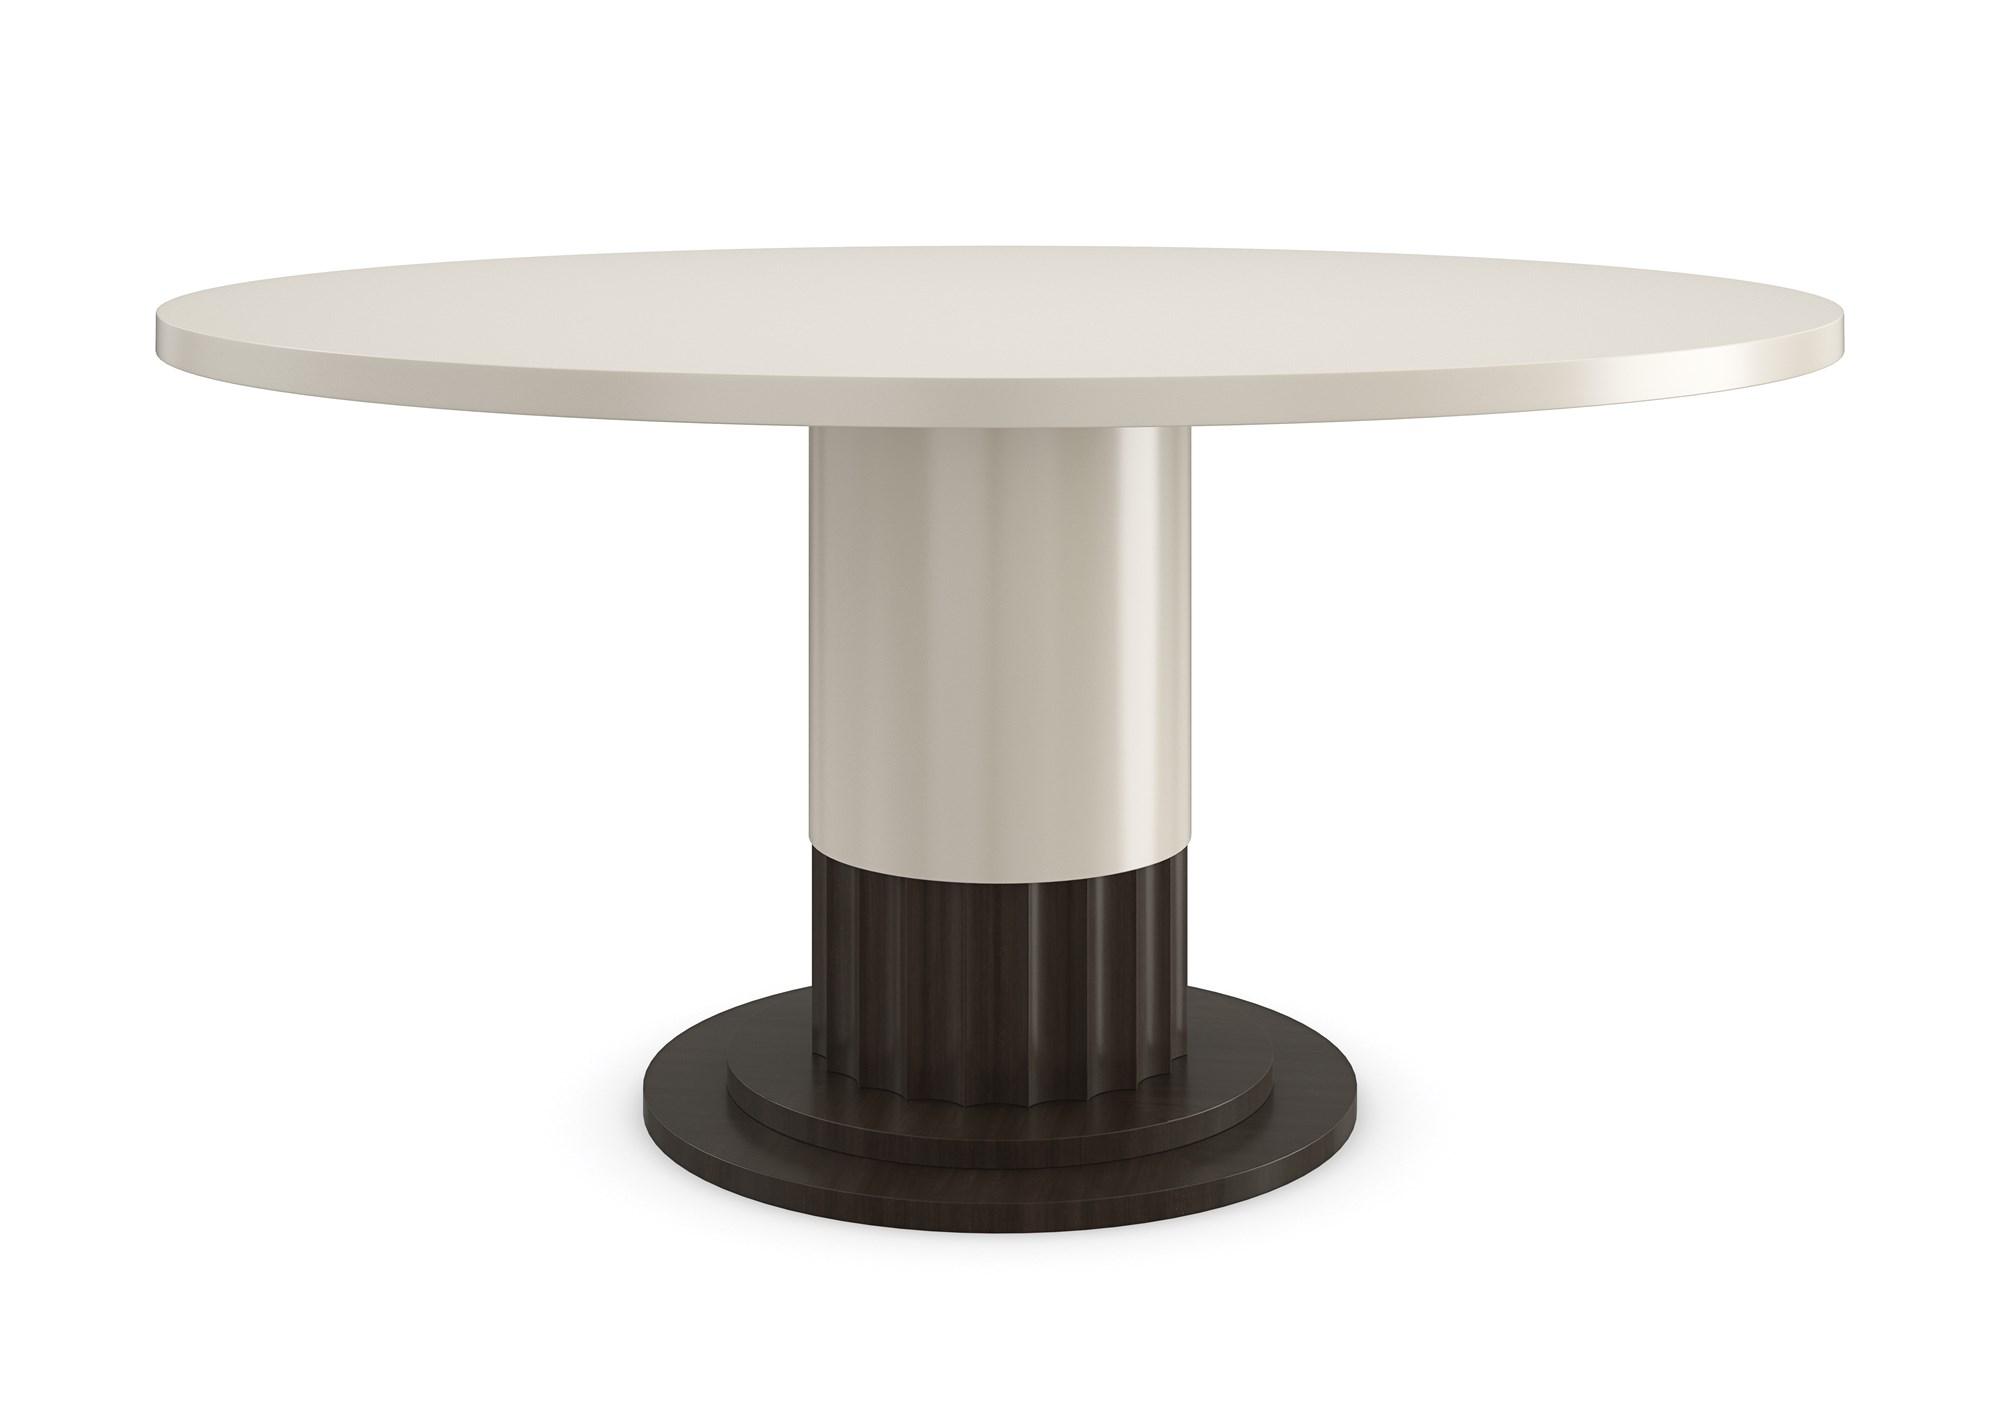 Traditional Dining Table DORIAN CLA-423-202 in Dark Chocolate, Ivory 